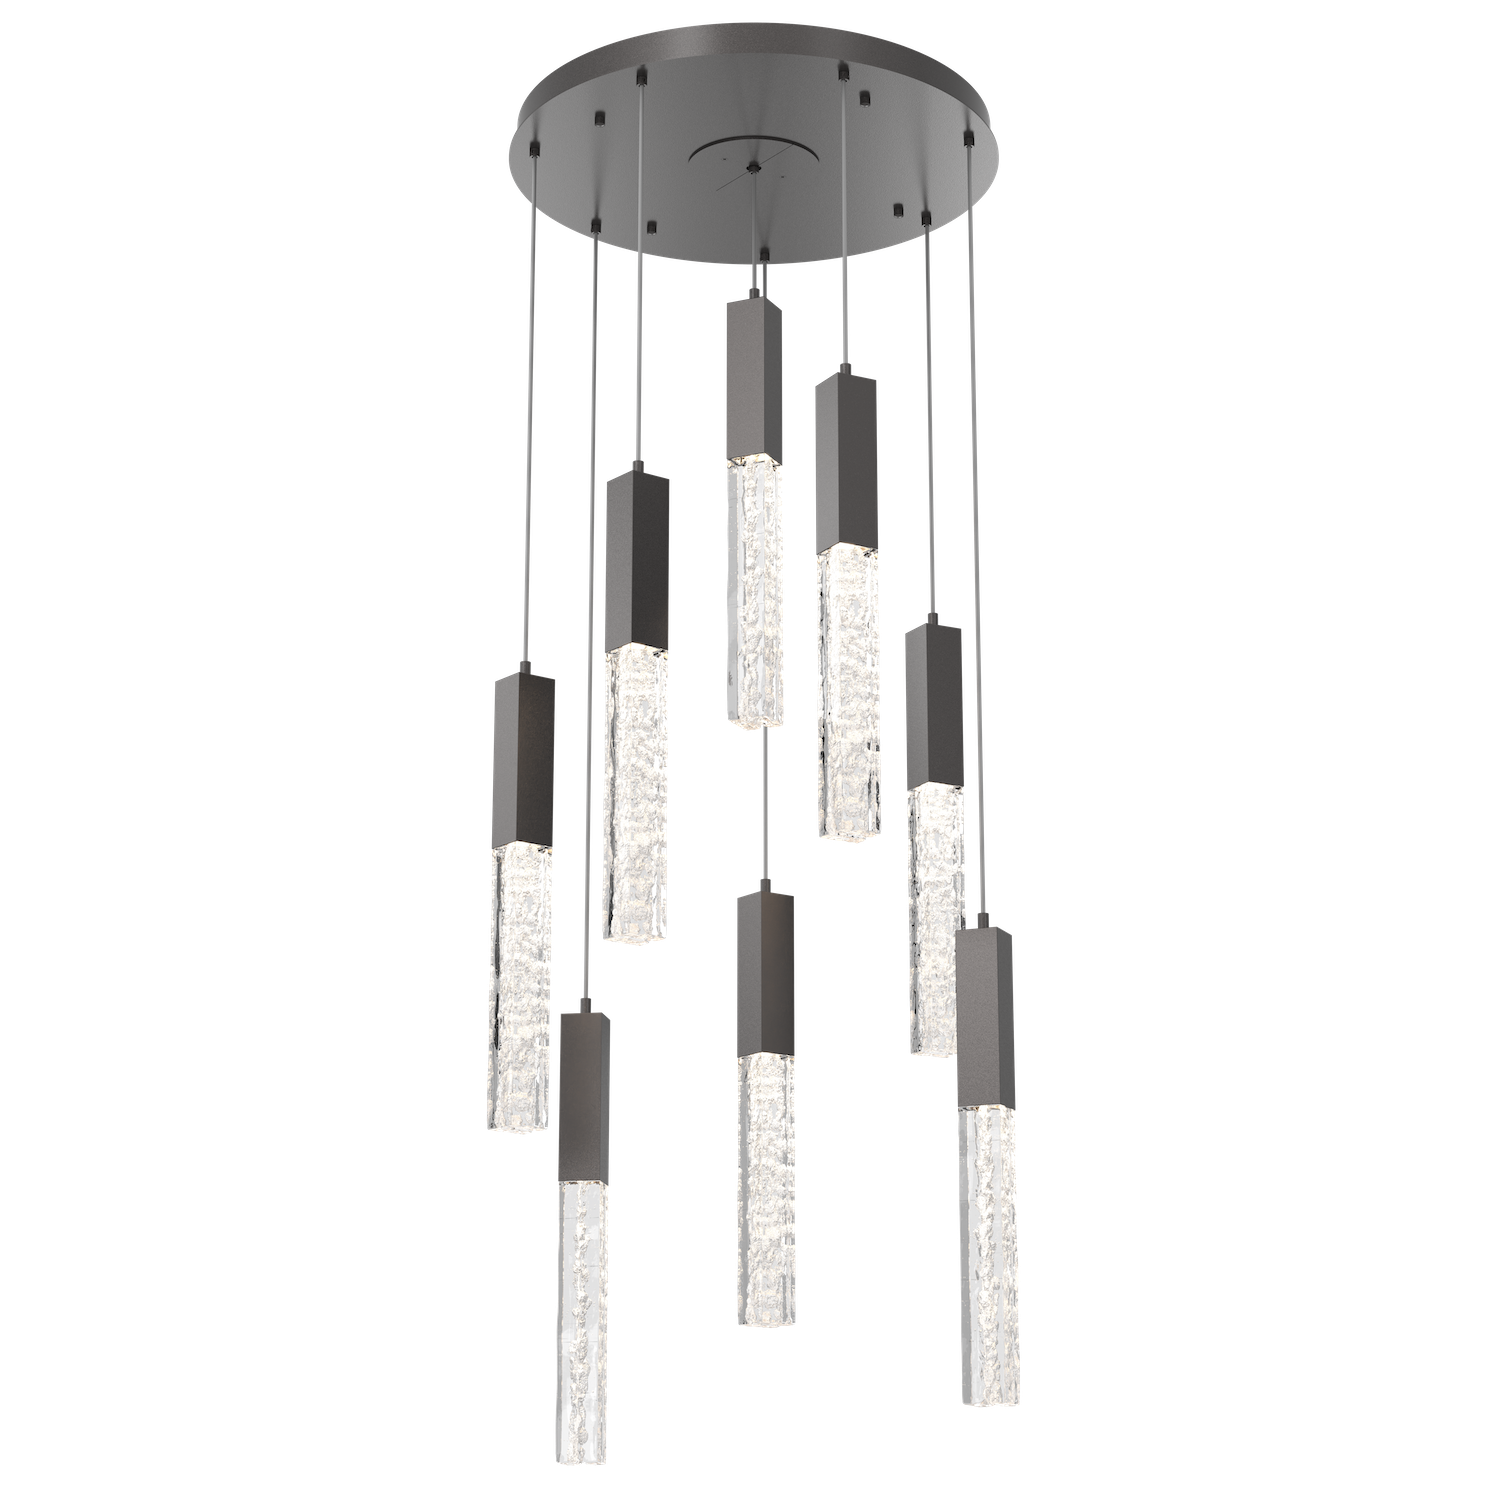 CHB0060-08-GP-GC-Hammerton-Studio-Axis-8-Light-Pendant-Chandelier-with-Graphite-finish-and-clear-cast-glass-and-LED-lamping